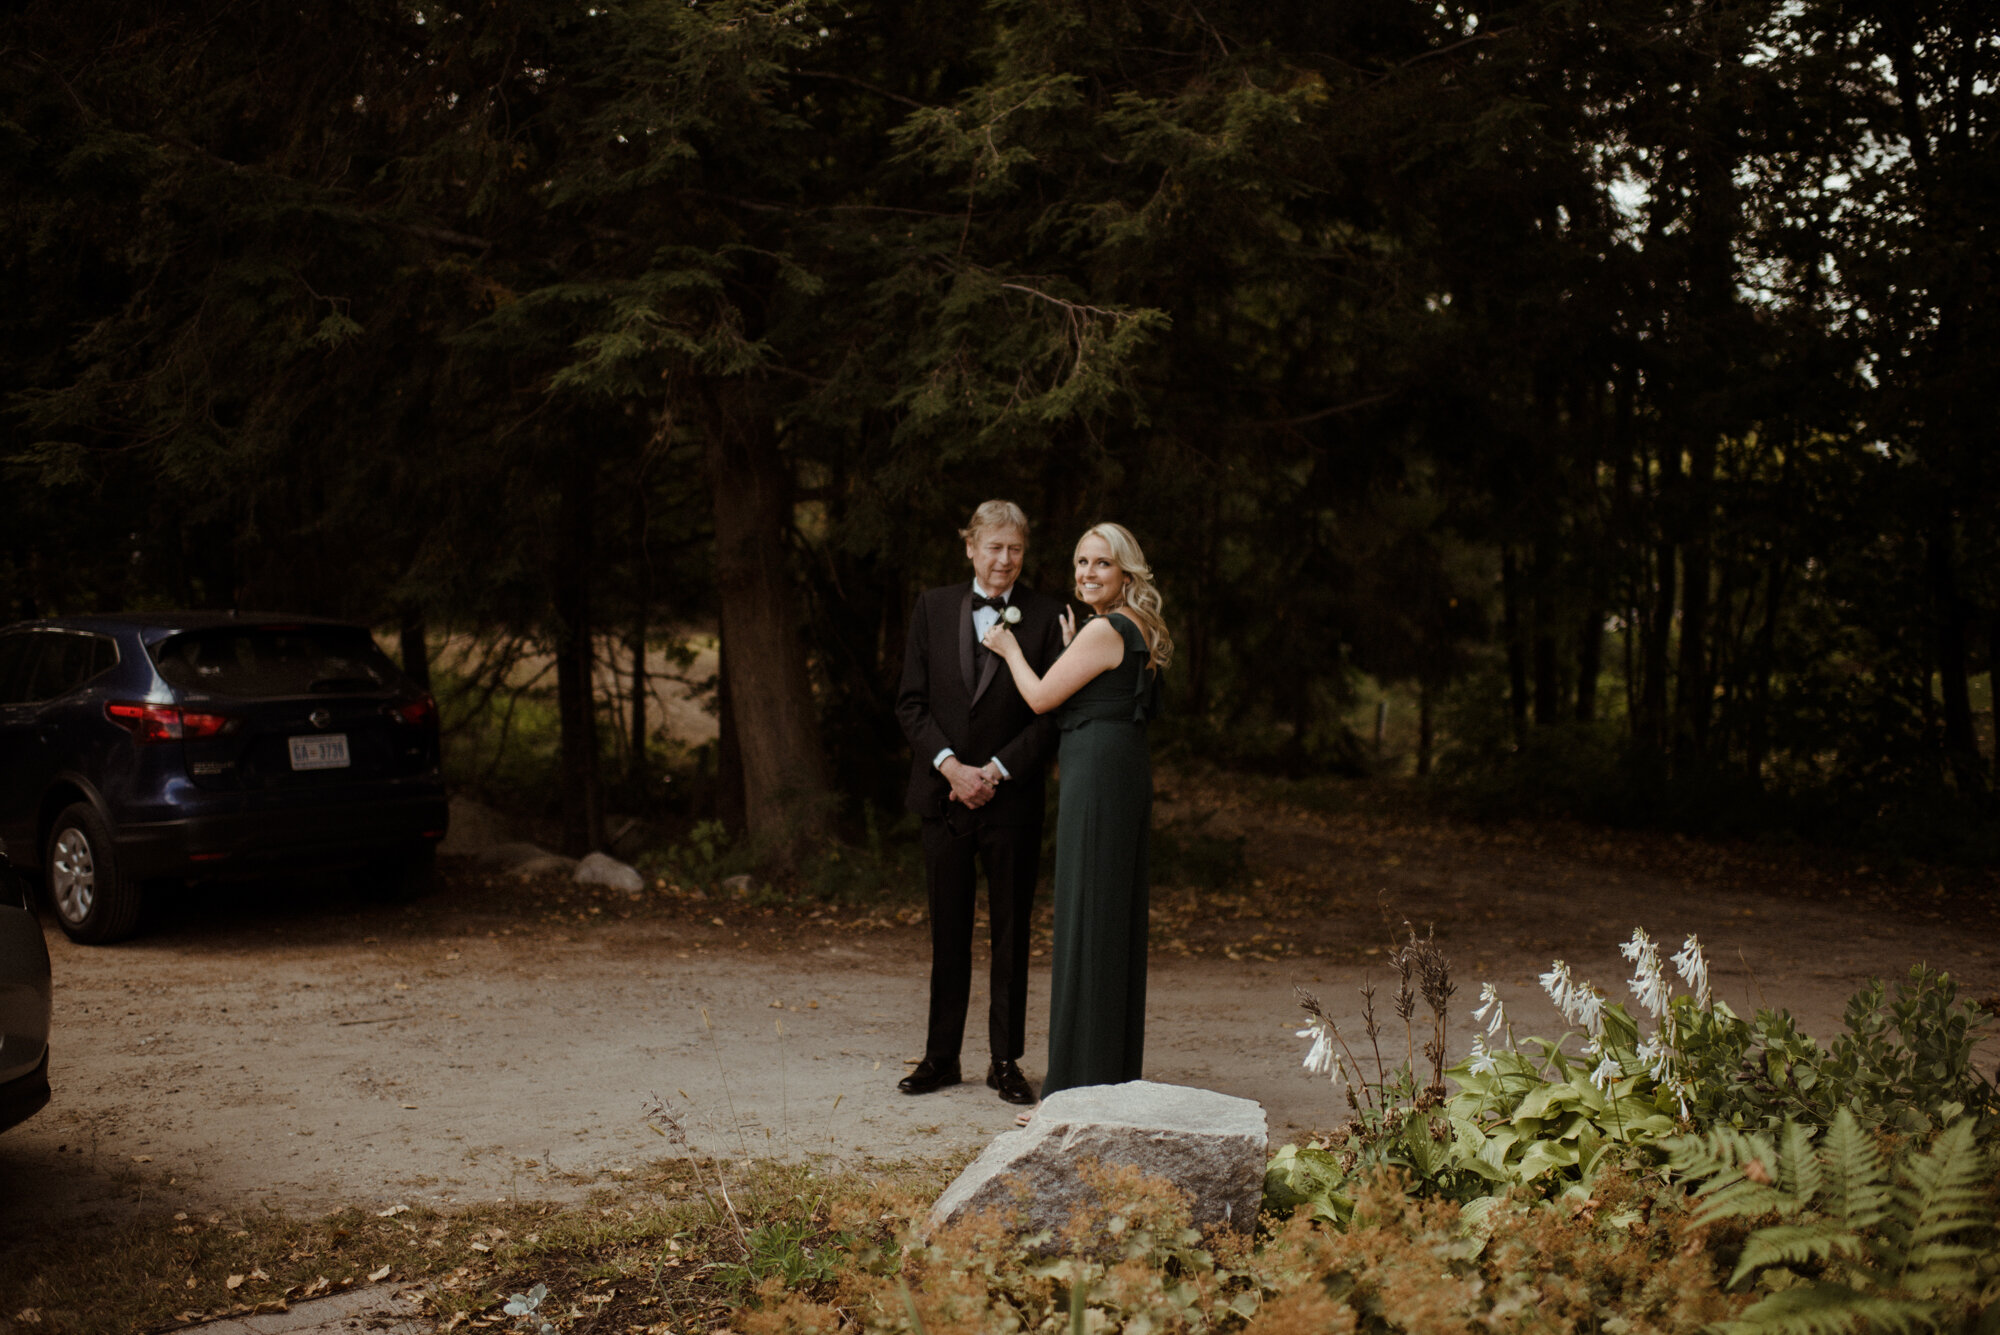 Autumn Elopement in New Hampshire - Backyard Wedding during COVID and Sunrise Hike in Wedding Dress - White Sails Creative_38.jpg